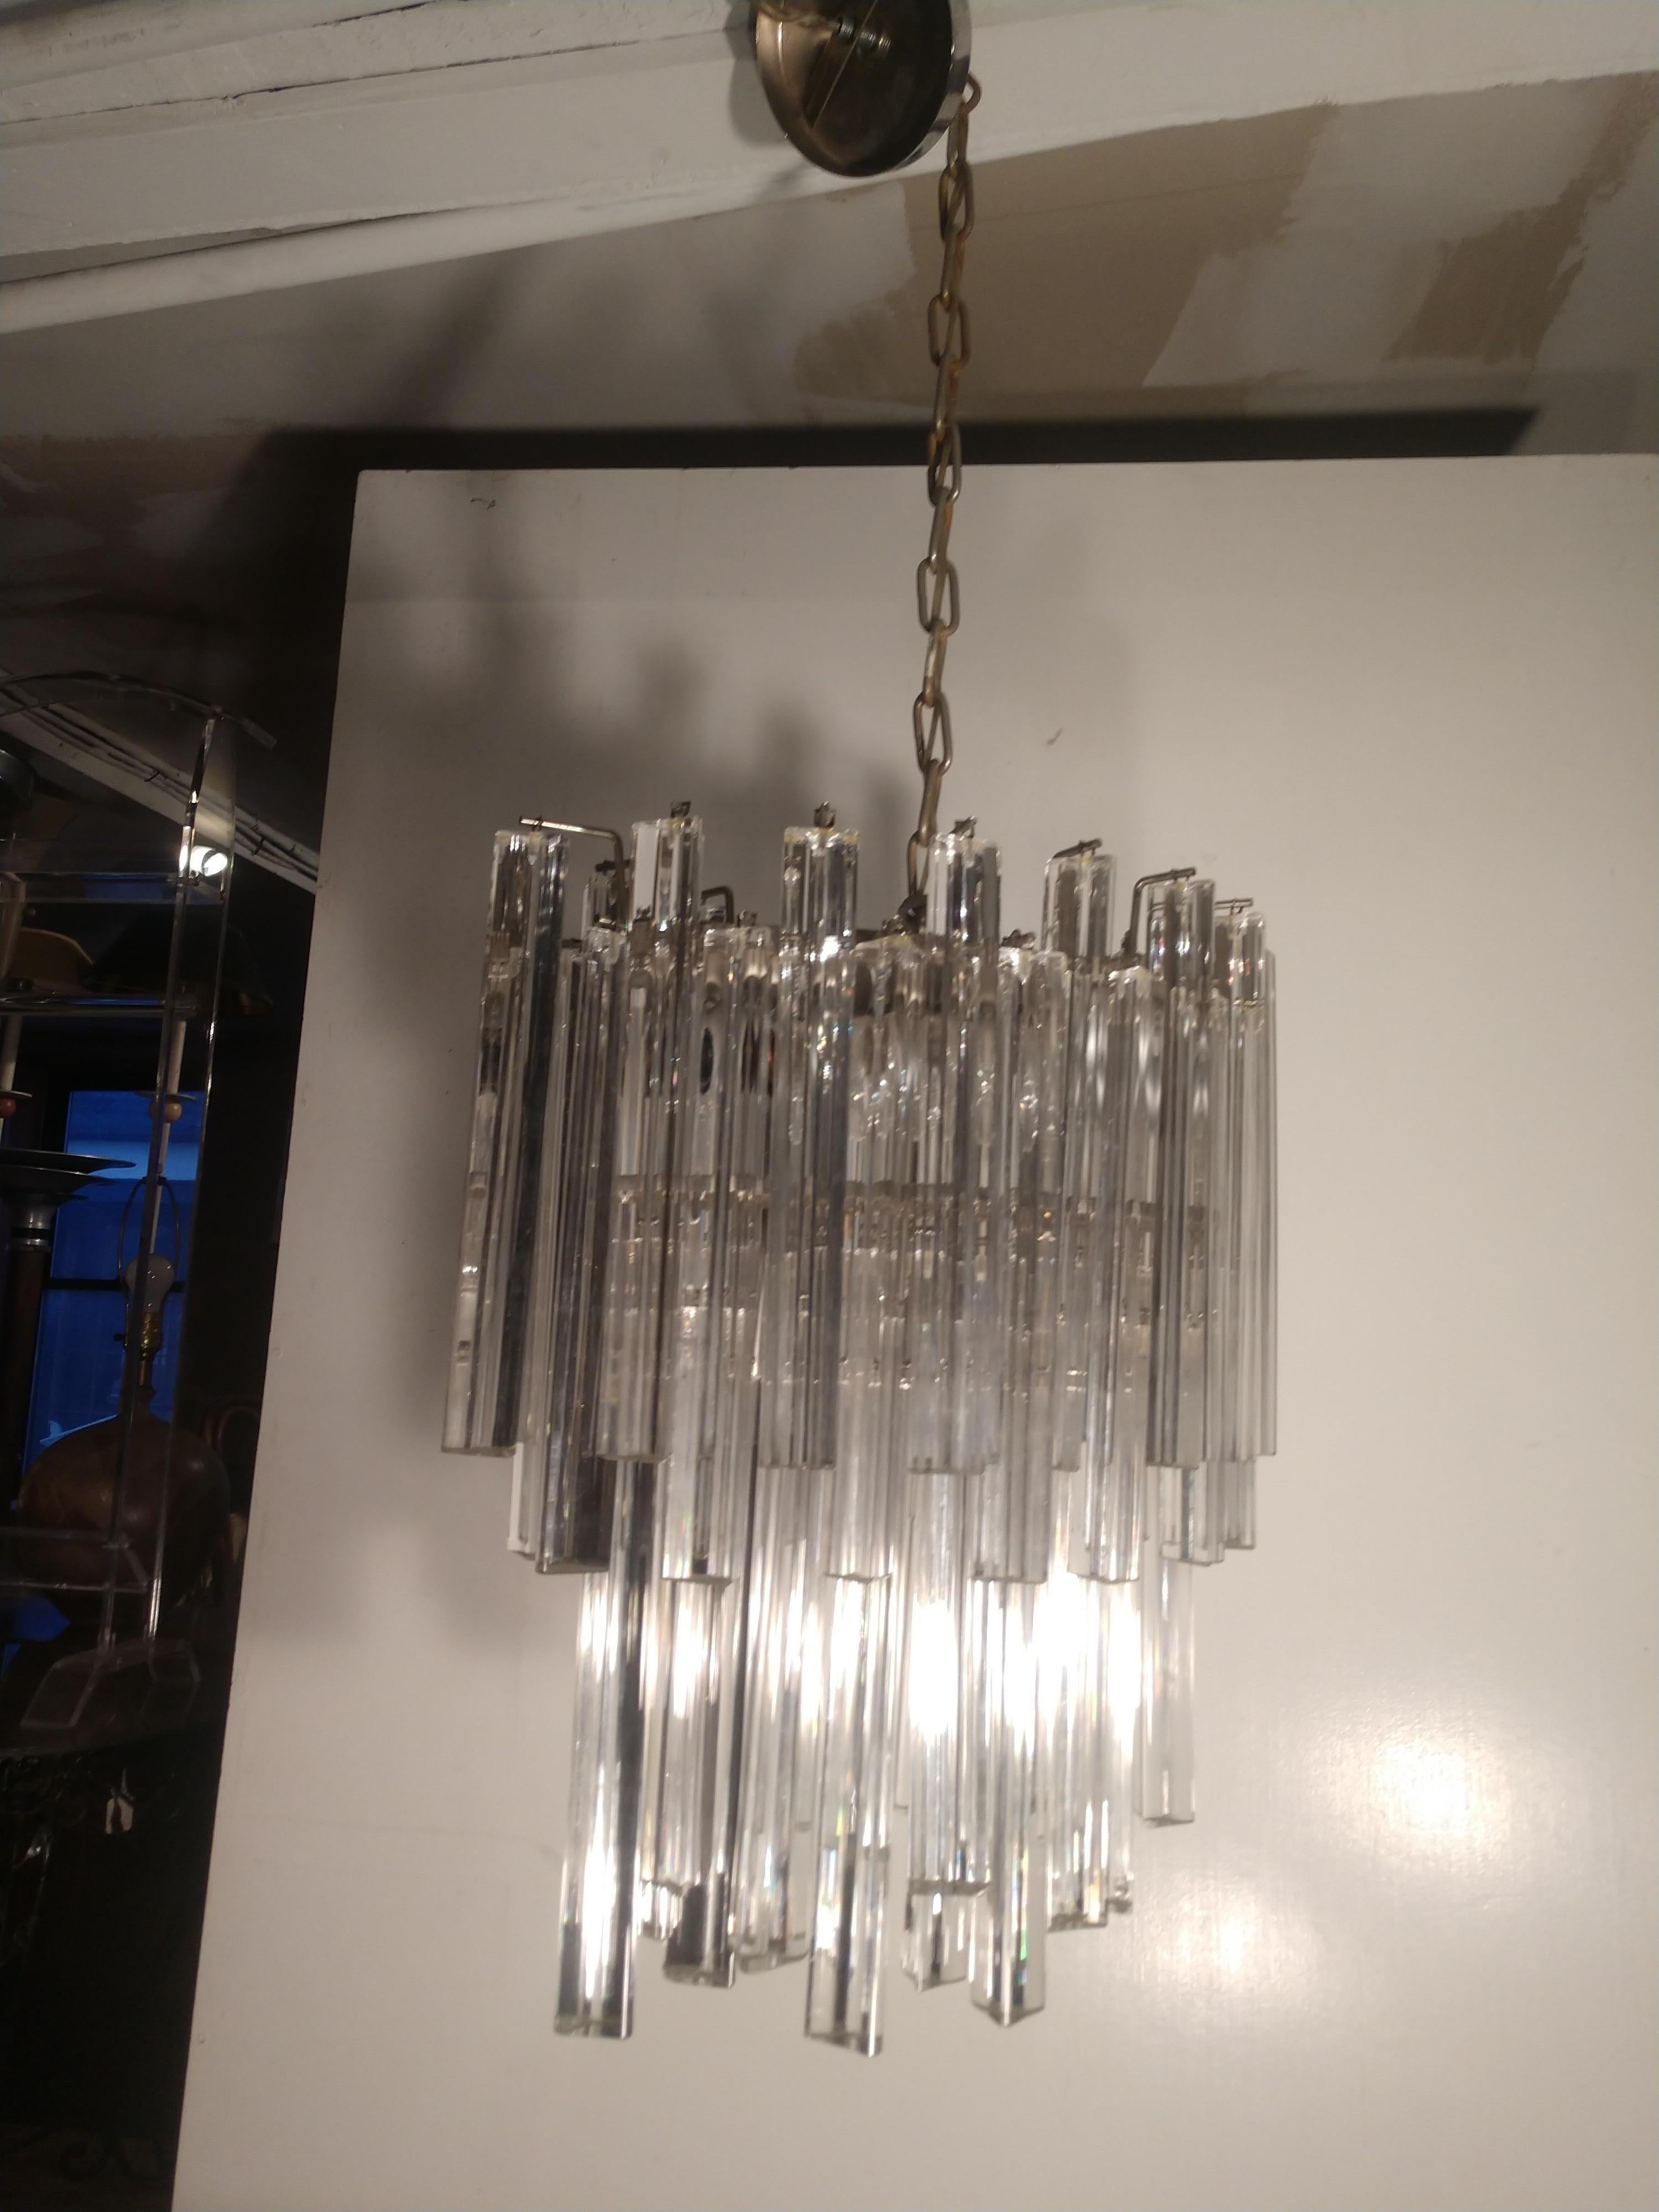 Fabulous Venini chandelier in an oval shape. 4 lights to illuminate the triangular prism. In excellent vintage condition with minimal wear. Total length is 42 with original canopy and chain.